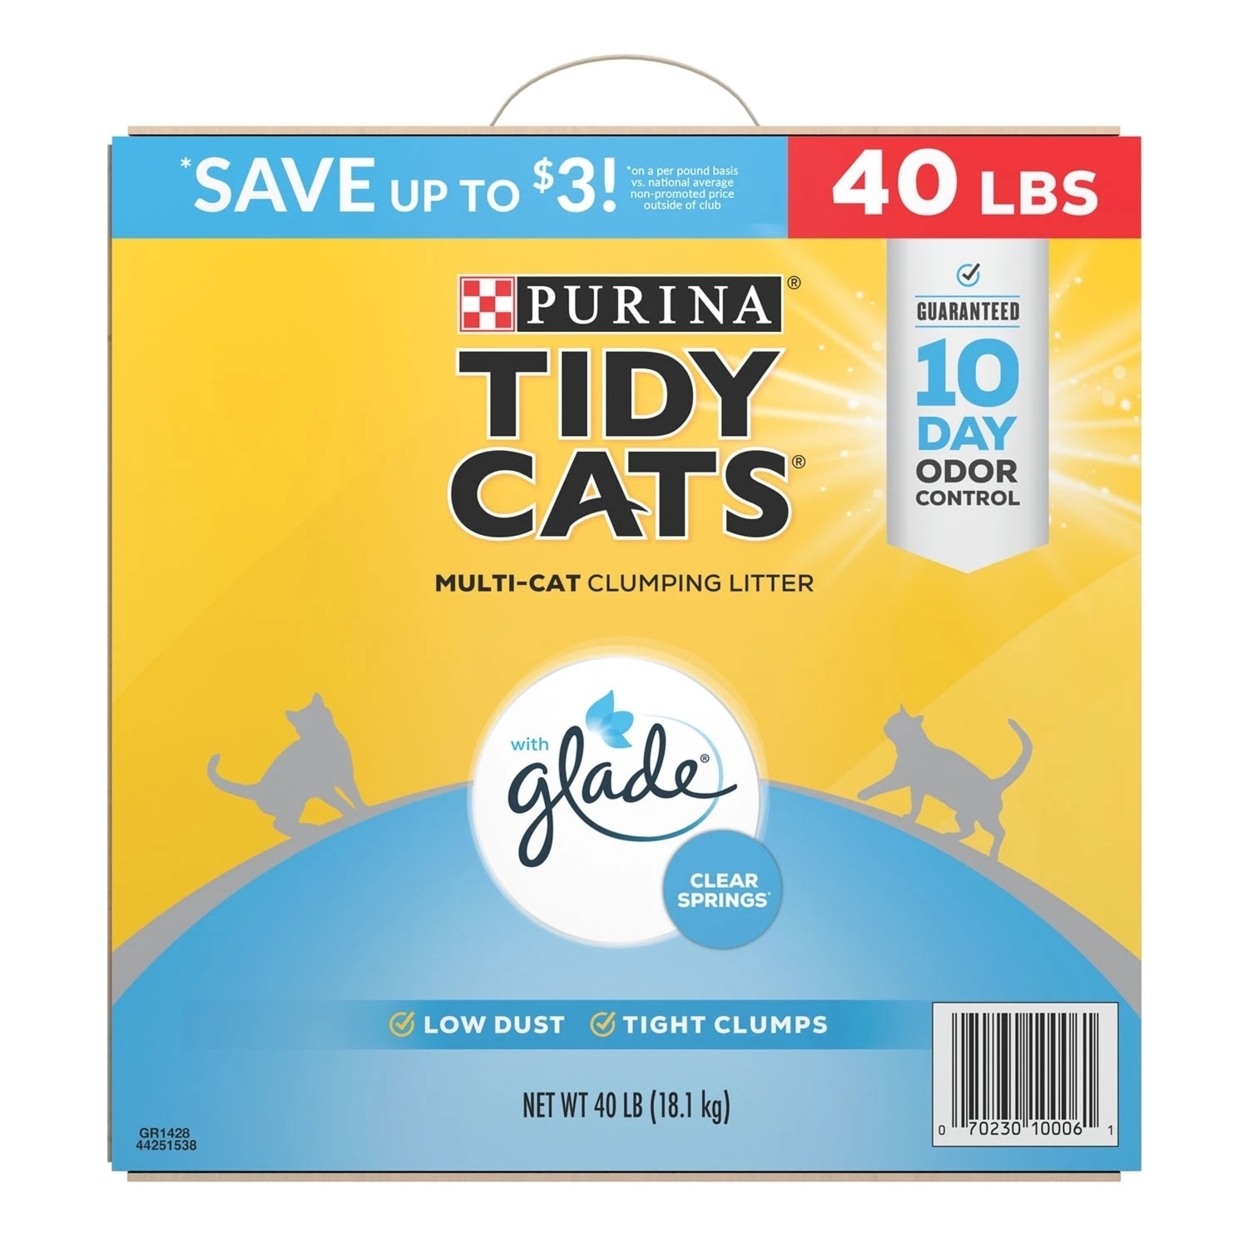 Purina Tidy Cats Multi-Cat Clumping Litter, Clear Springs Scent (40 Pounds)